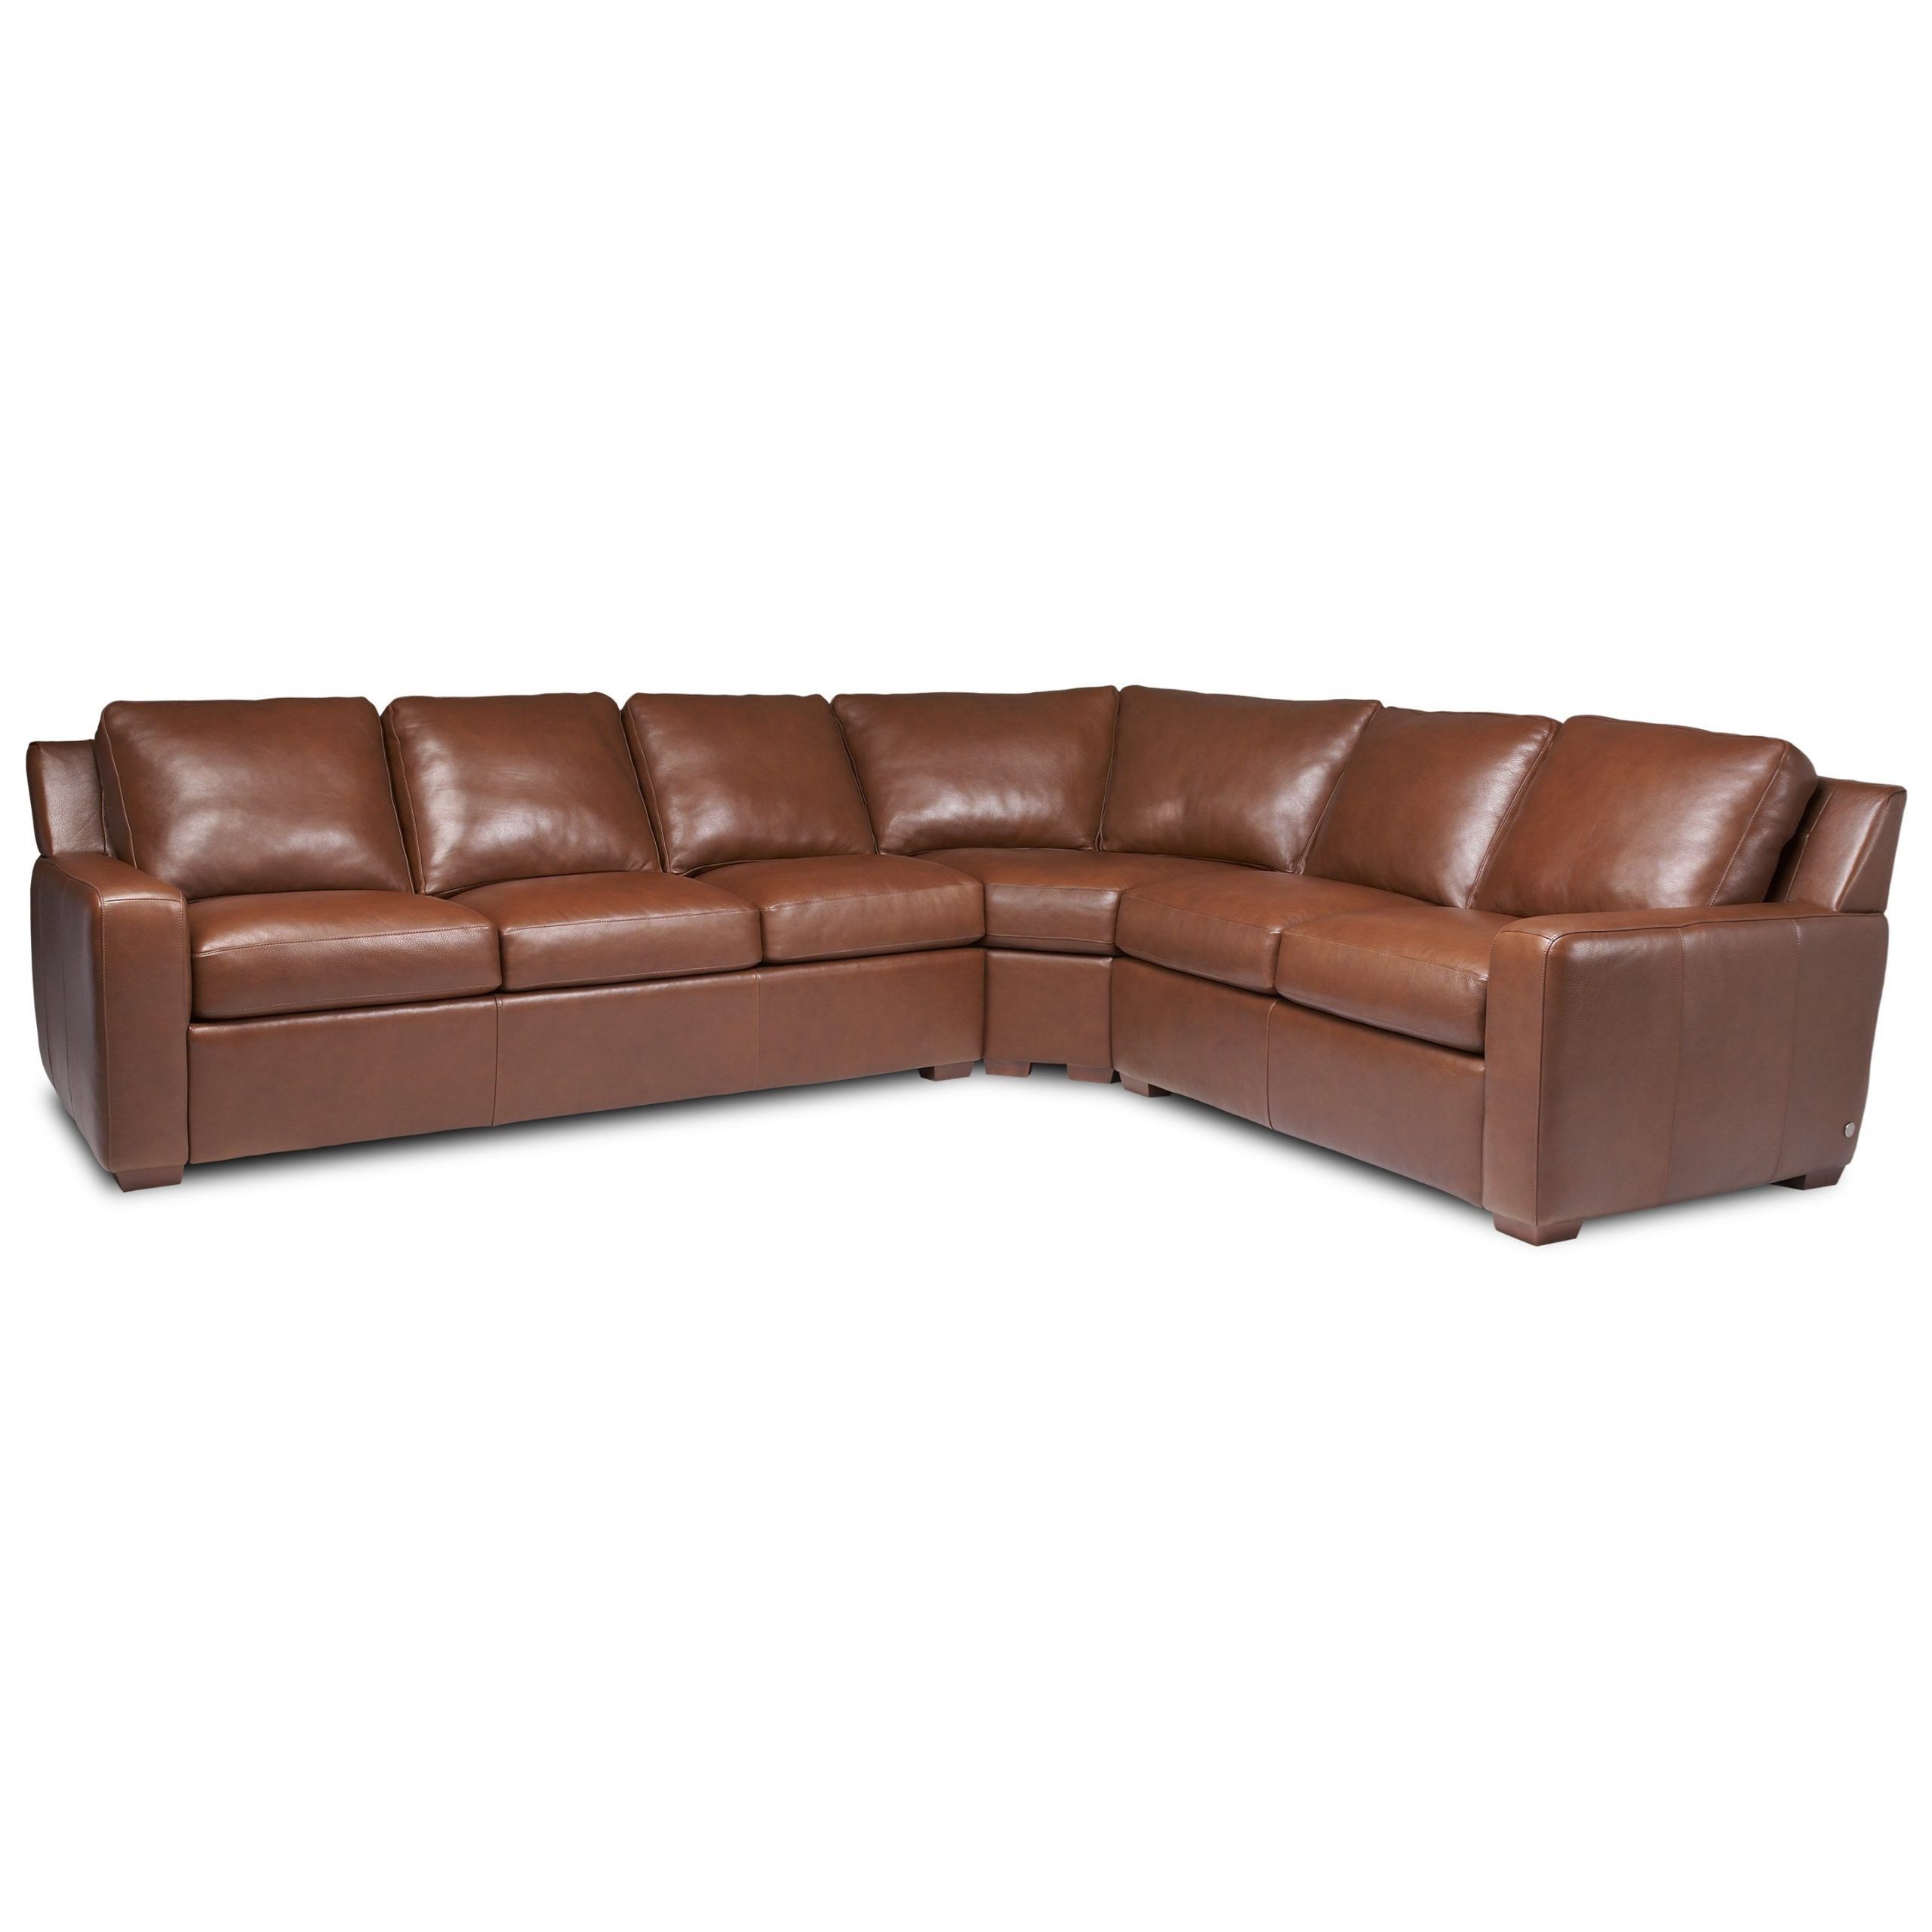 American Leather Lisben Contemporary L Shaped Sectional | Find Your With Modern L Shaped Sofa Sectionals (View 16 of 20)